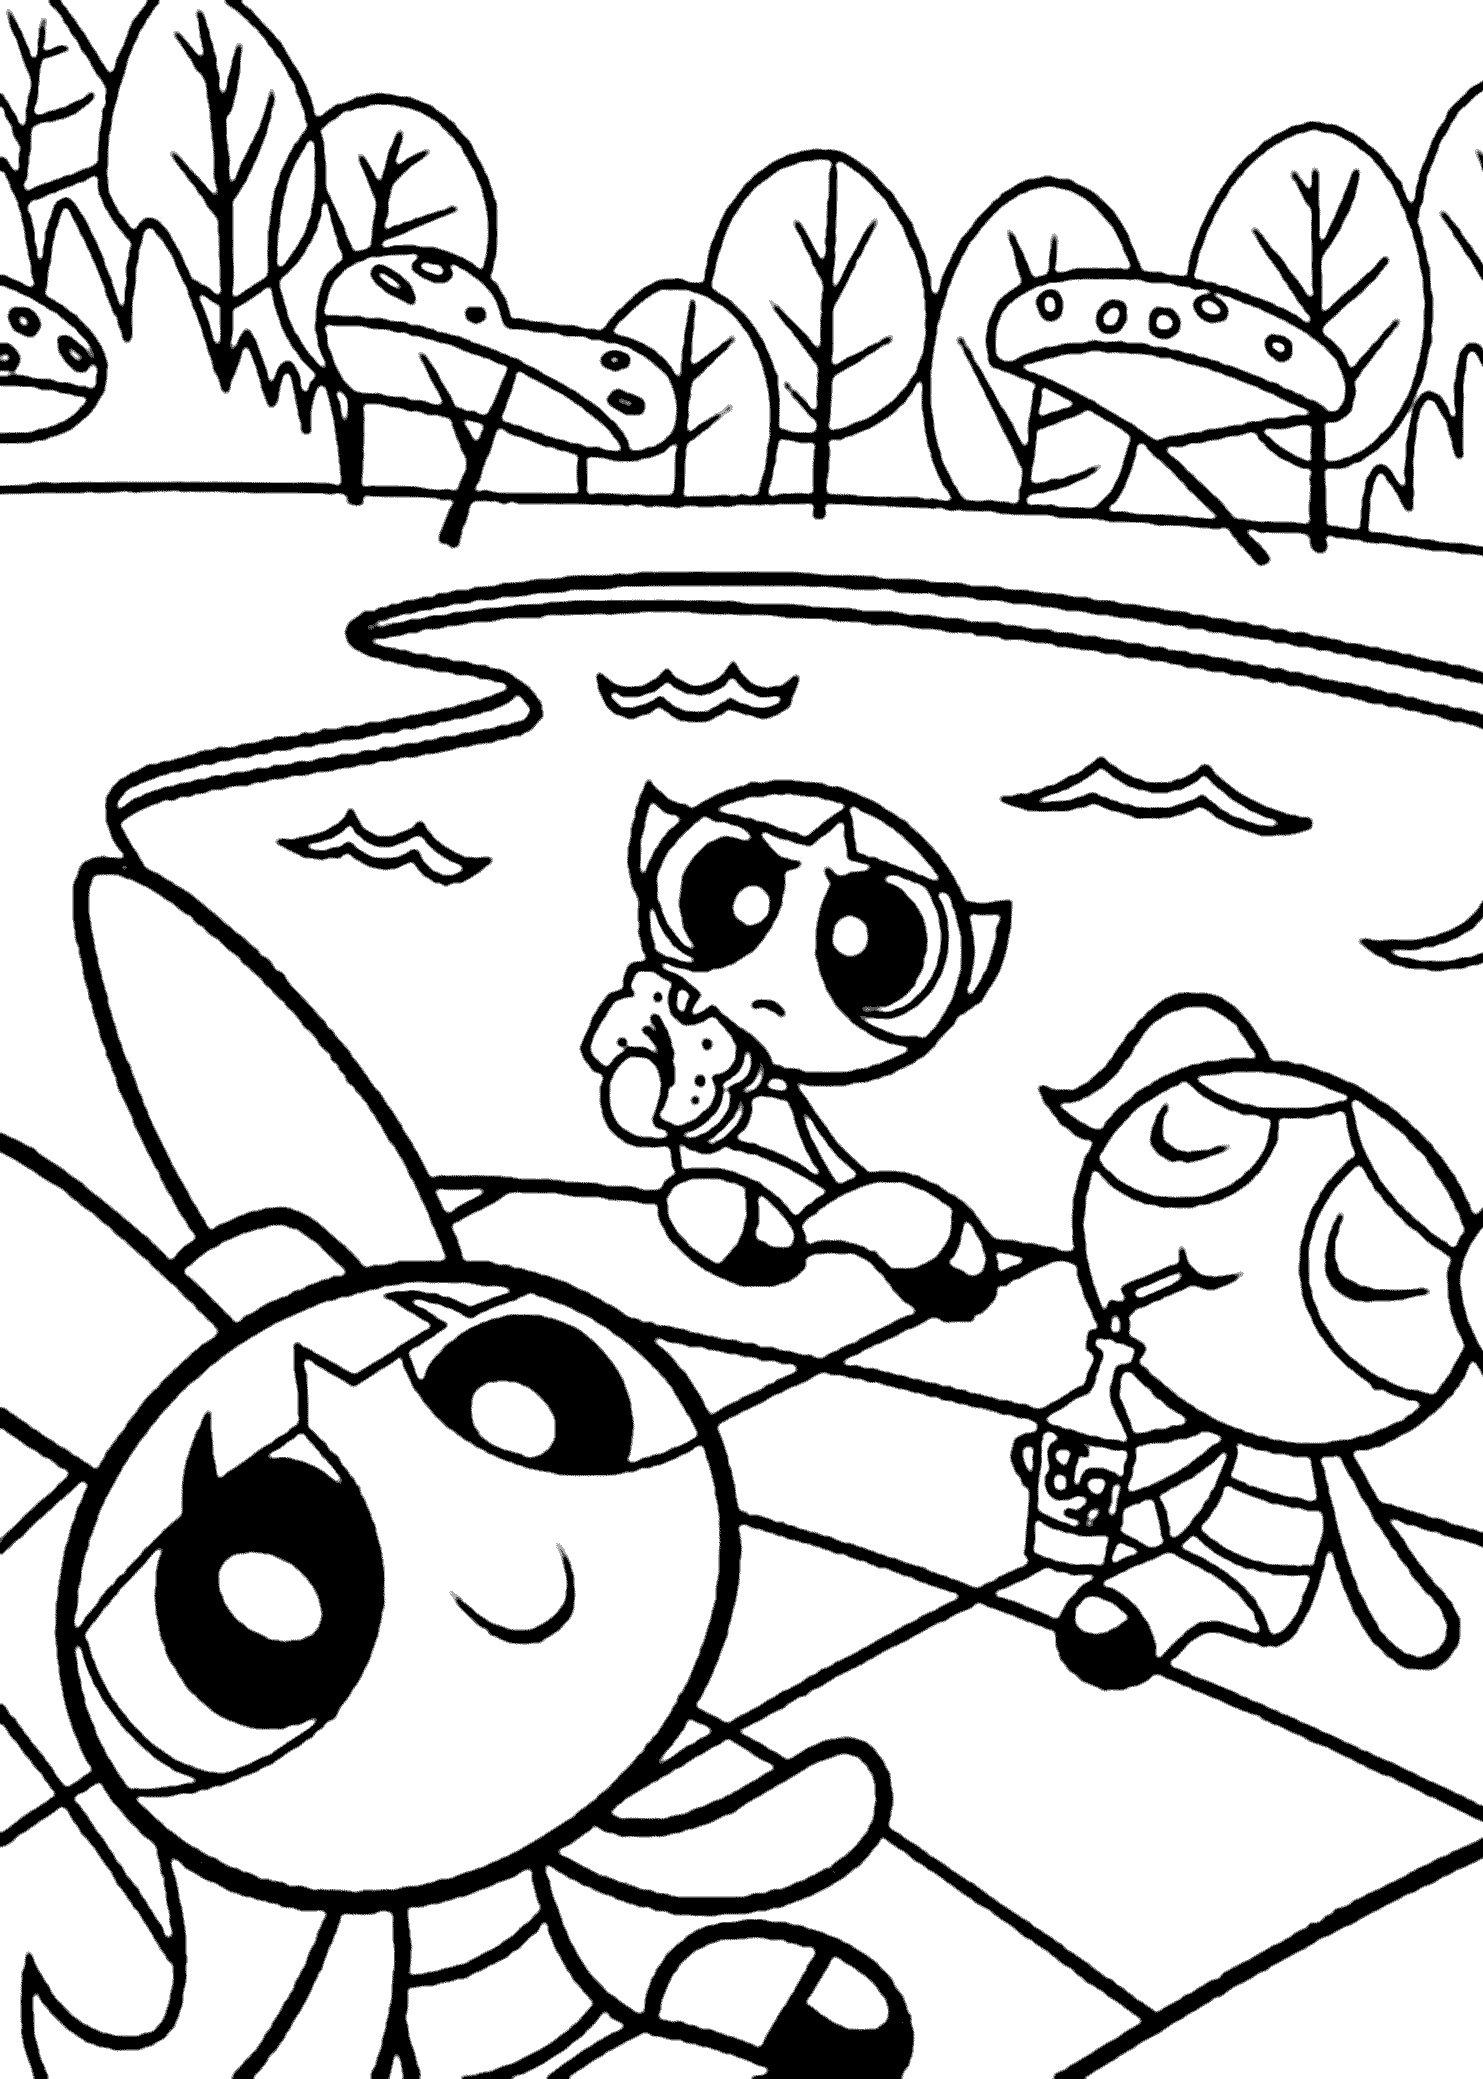 Powerpuff Girls Coloring Page